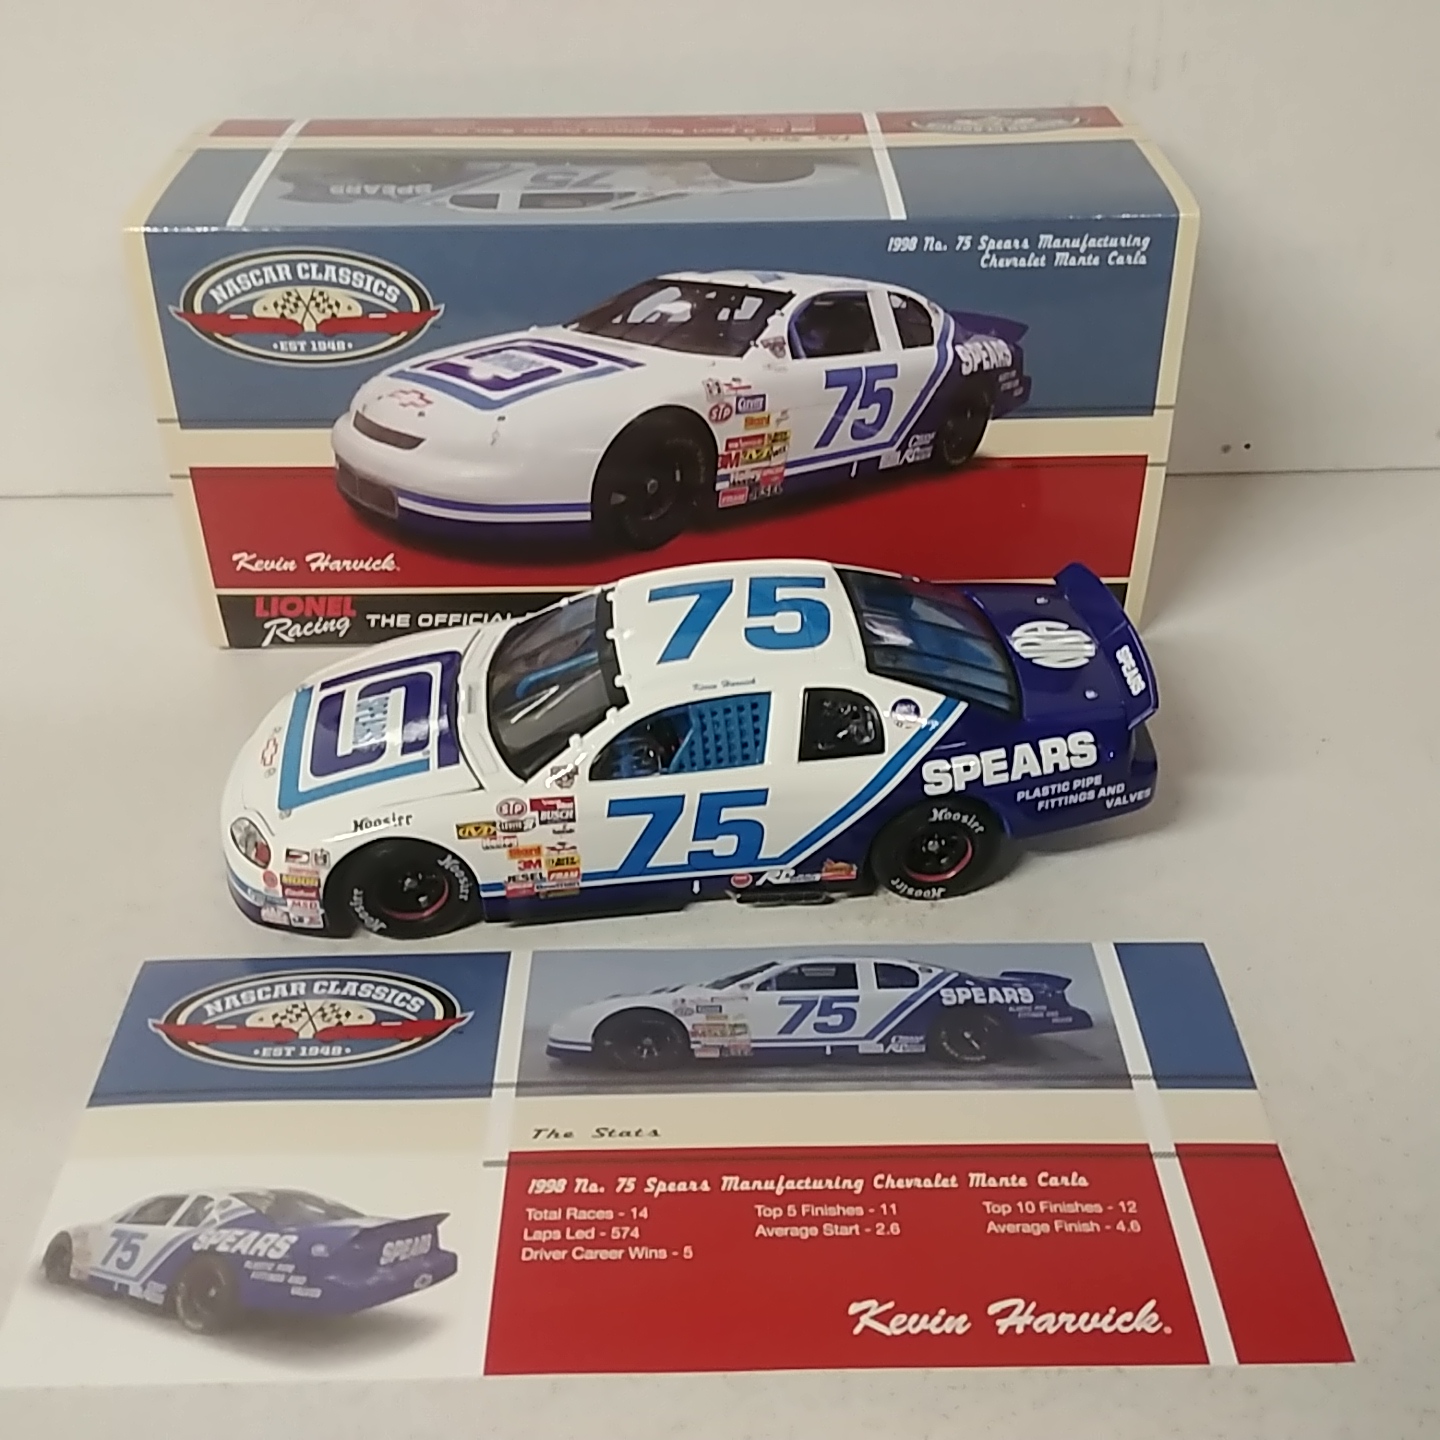 1998 Kevin Harvick 1/24th Spears Manufacturing "NASCAR West Series Champ" car